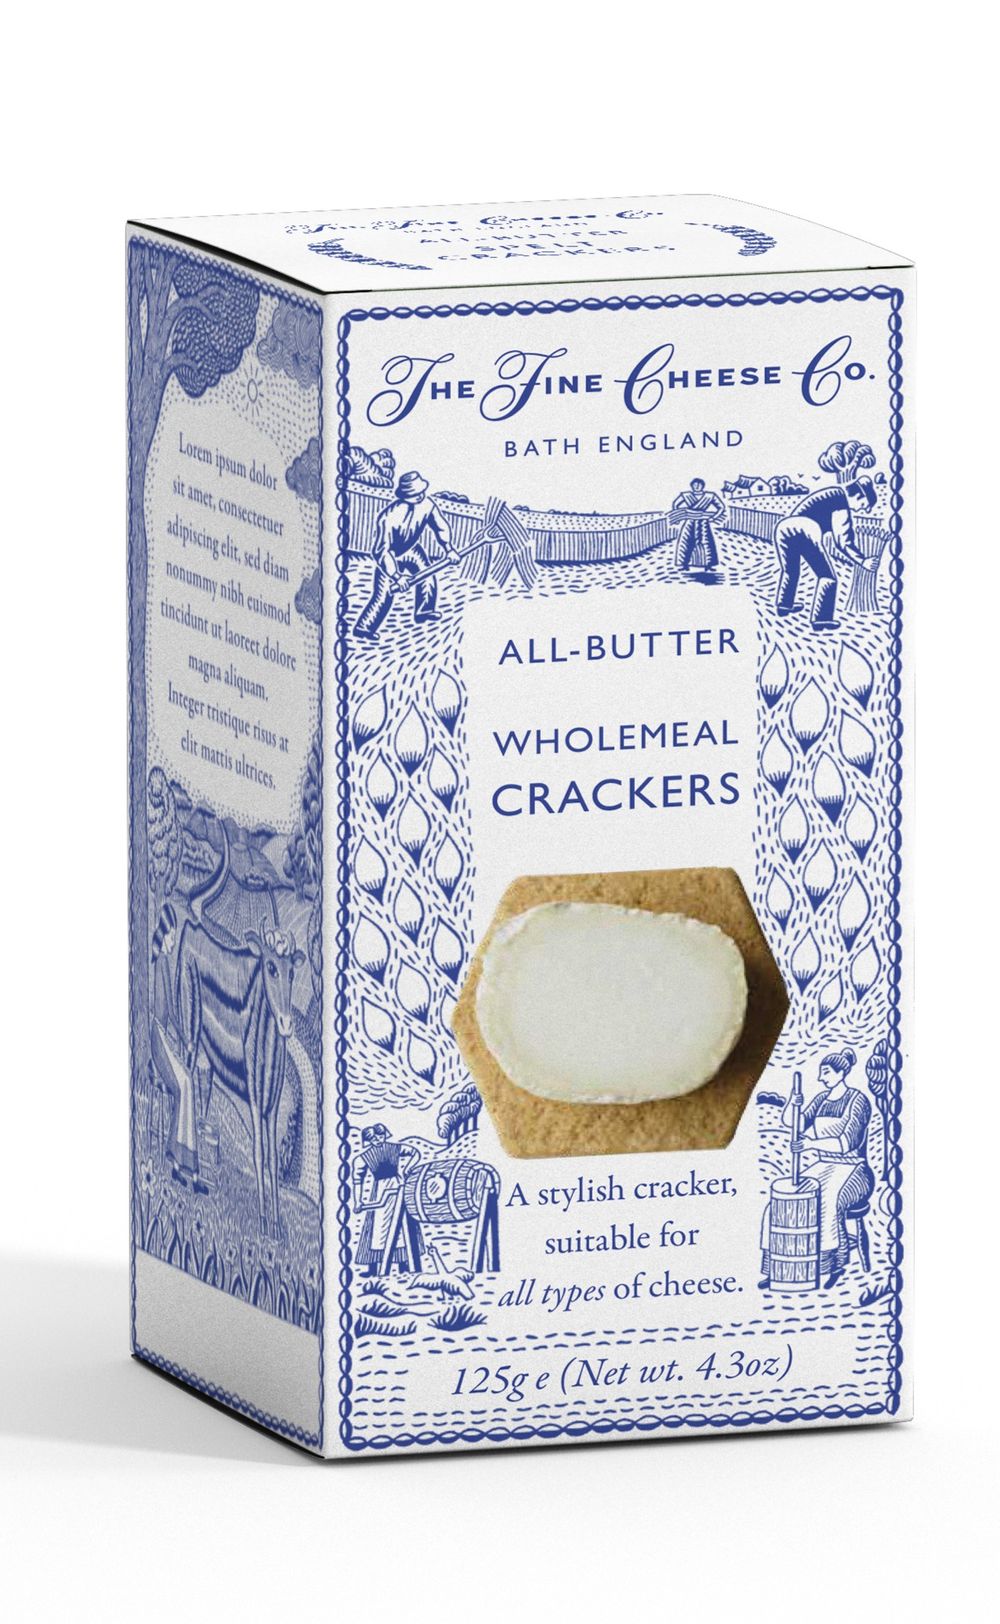 All-Butter Wholemeal Crackers